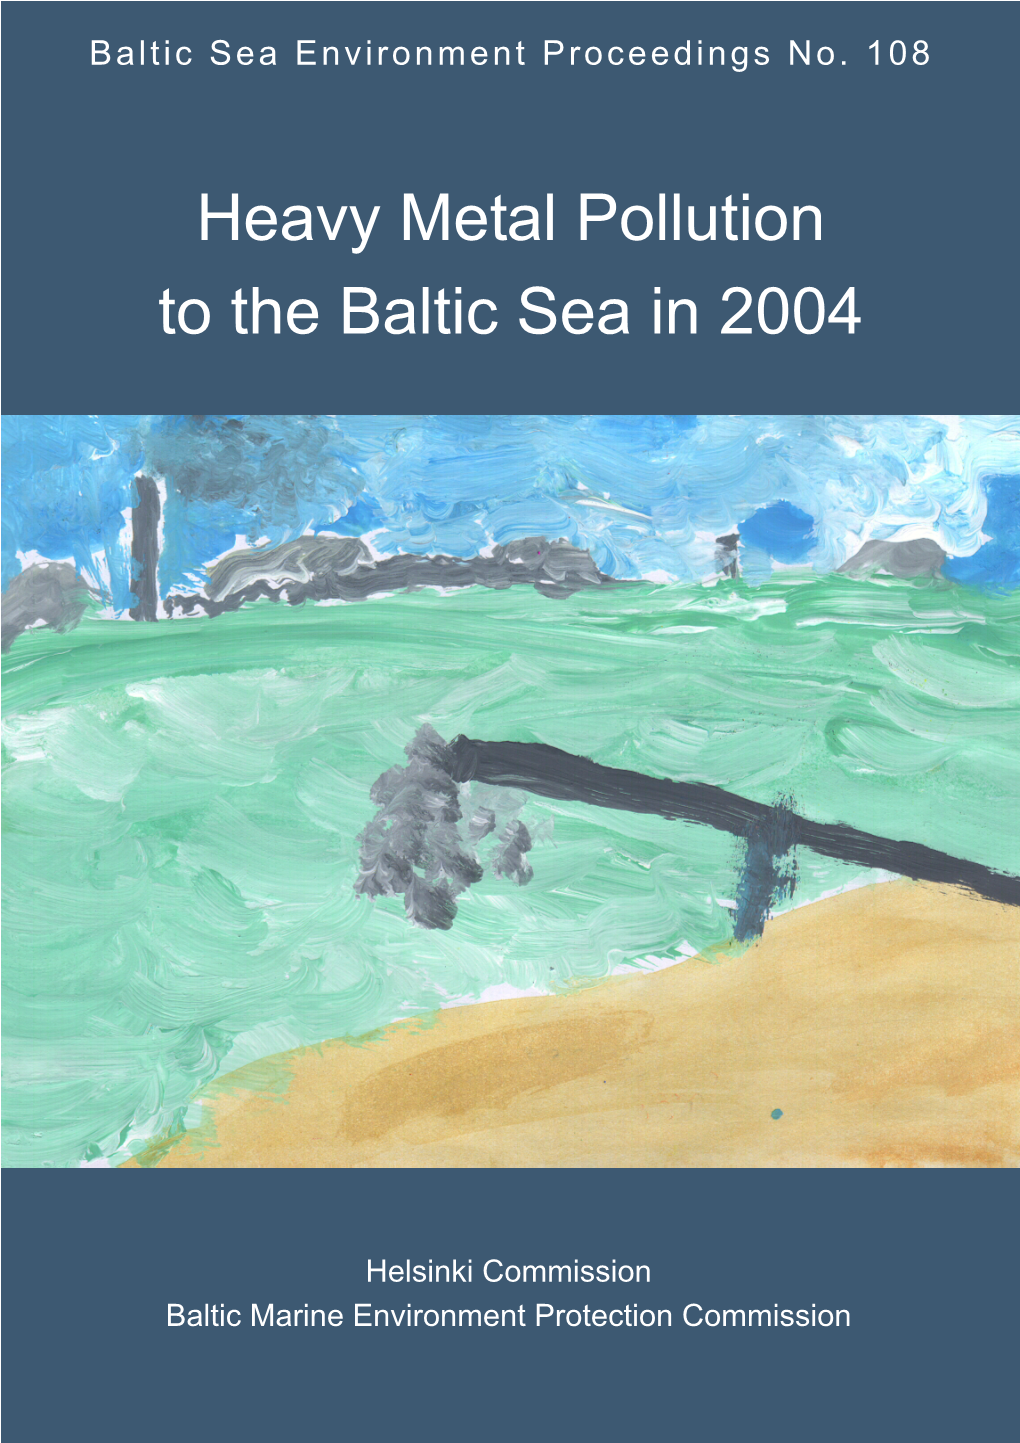 Heavy Metal Pollution to the Baltic Sea in 2004